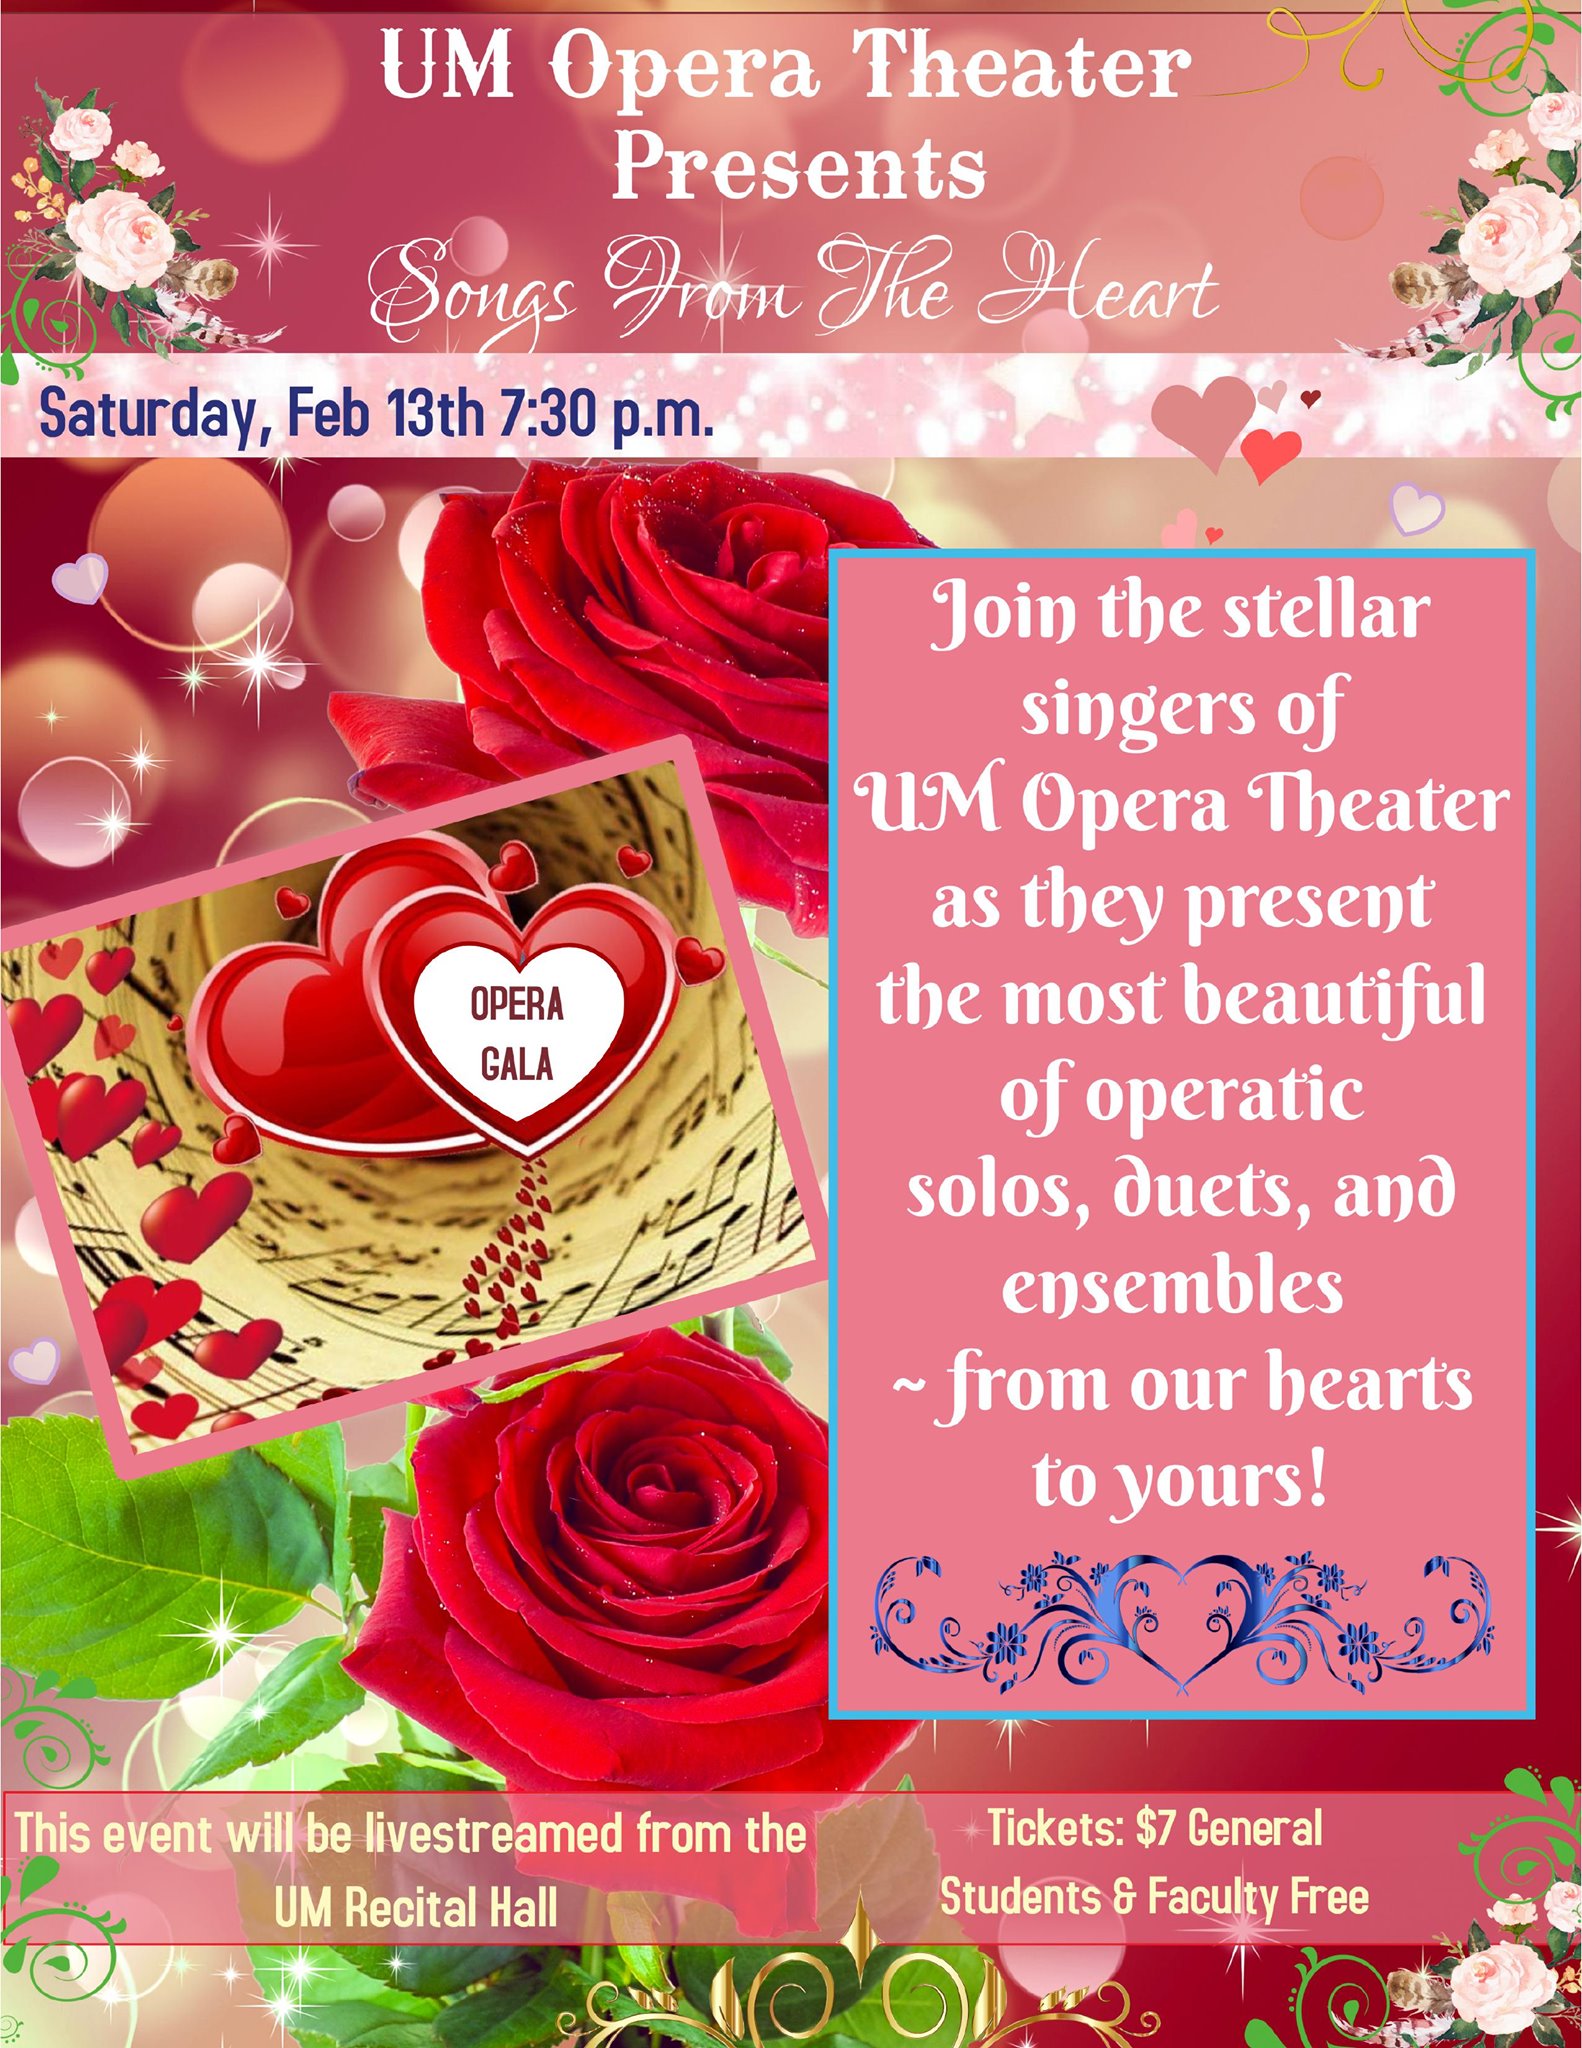 UM Opera Theater presents Songs From the Heart